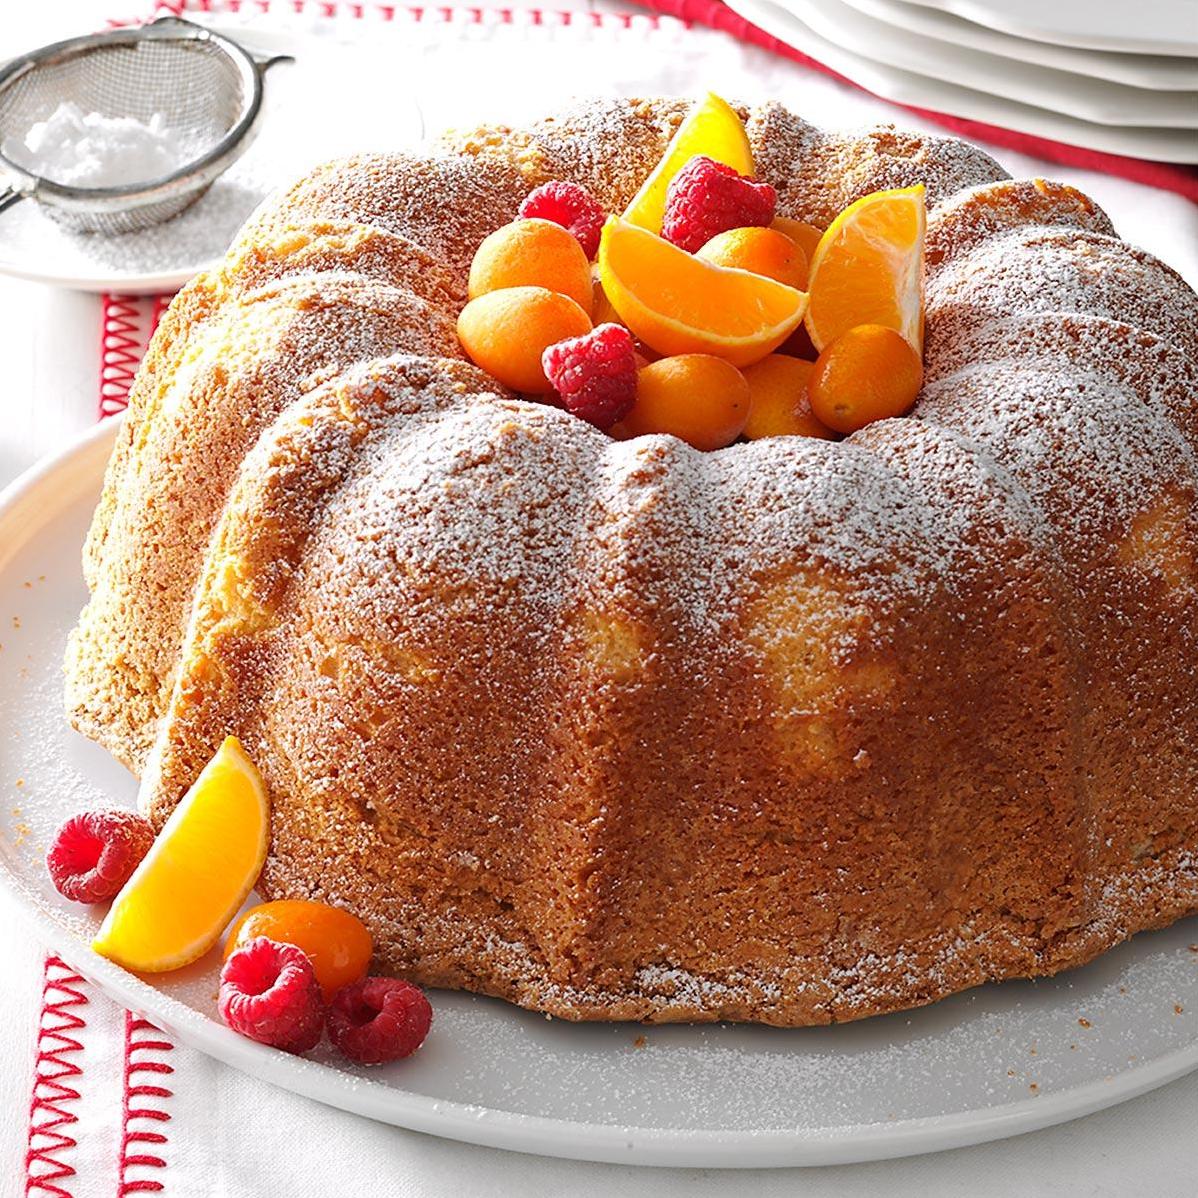  The perfect cake for any occasion with its moist and dense texture.